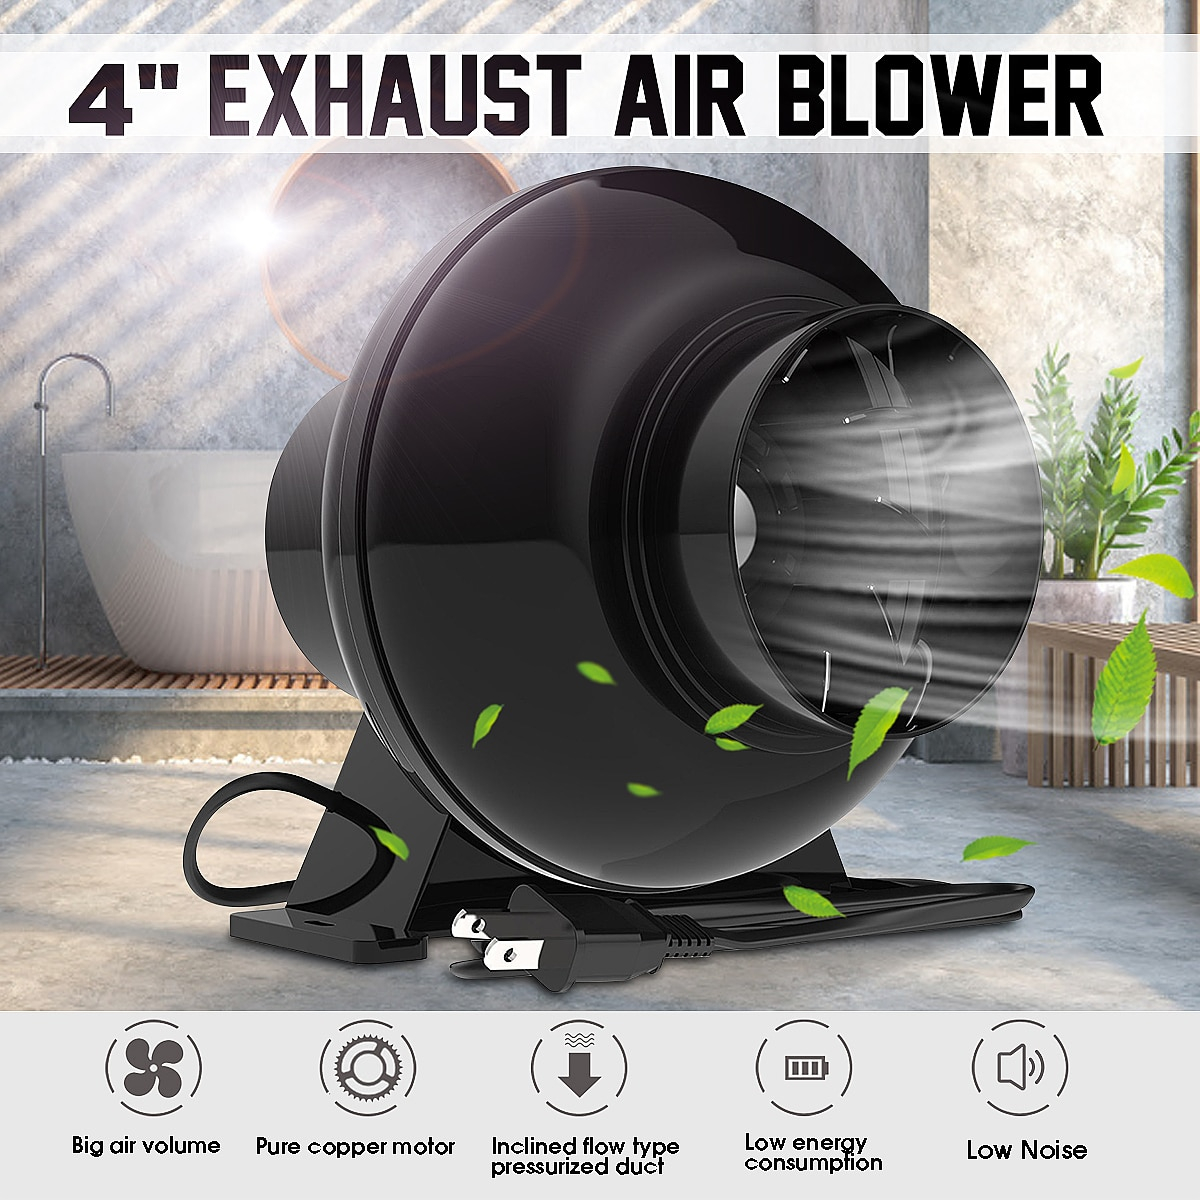 Us 2846 46 Off4 Inch Exhaust Fan 220v Inline Duct Extractor Air Booster Fan Ventilation Exhaust Air Blower Wall Ventilator Fan Home in dimensions 1200 X 1200